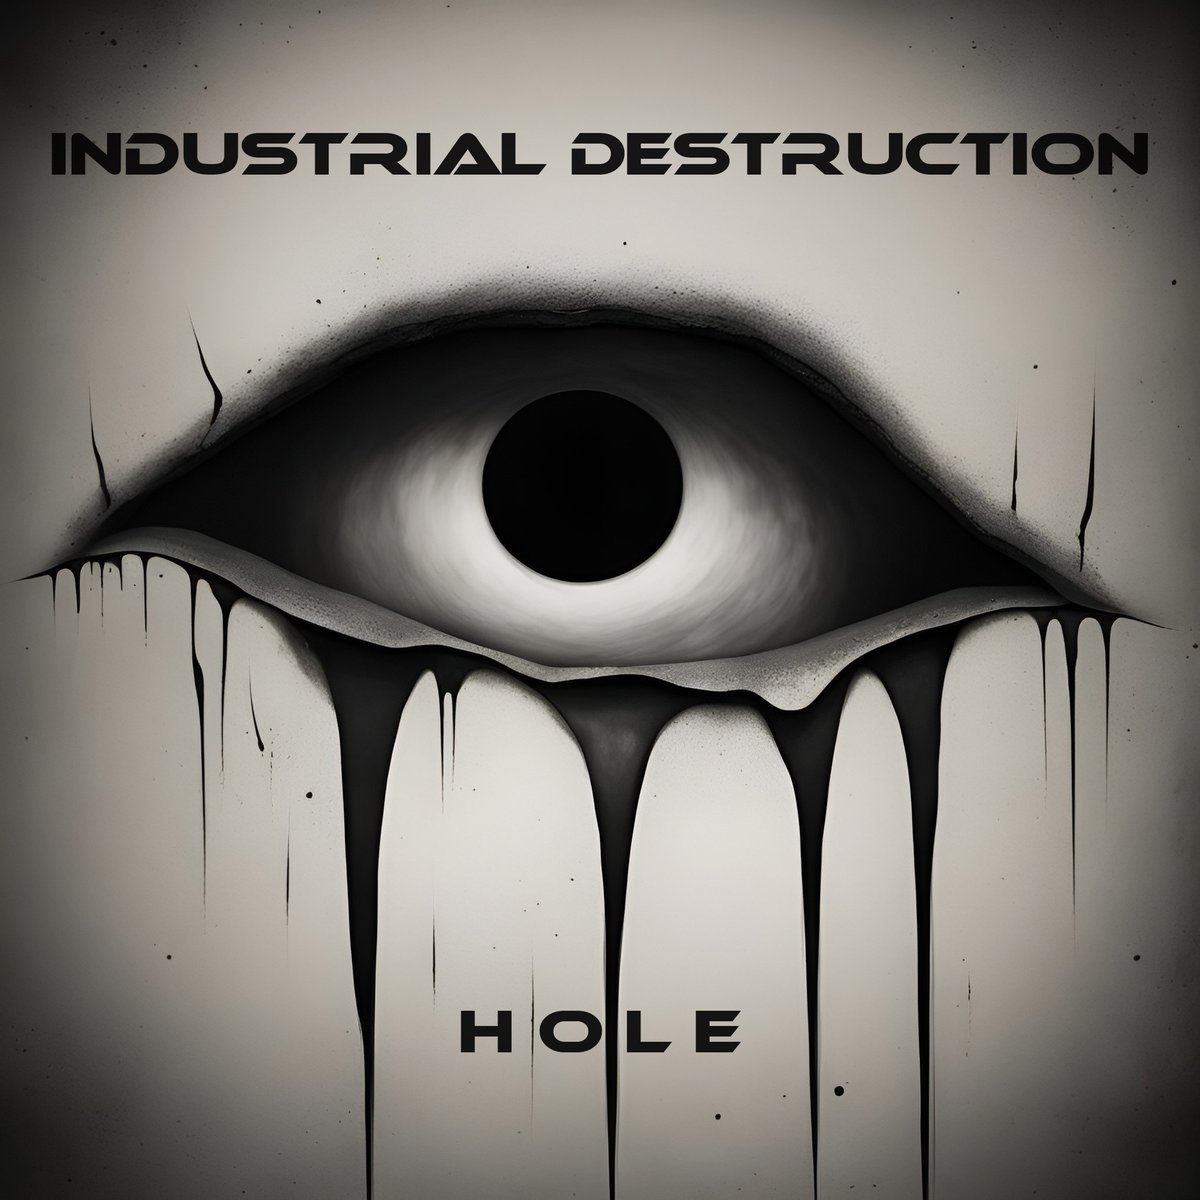 Hey :) New single out now! 'Hole' is the latest single from the album 'Indifference'... industrialdestruction.bandcamp.com/track/hole-2 Tomorrow on spotify and youtube! Share ID! Hear ID! Support ID! #industrialdestruction #hole #nɛwsingle #newalbum #indifference #darkmusic #industrialmusic #ebm